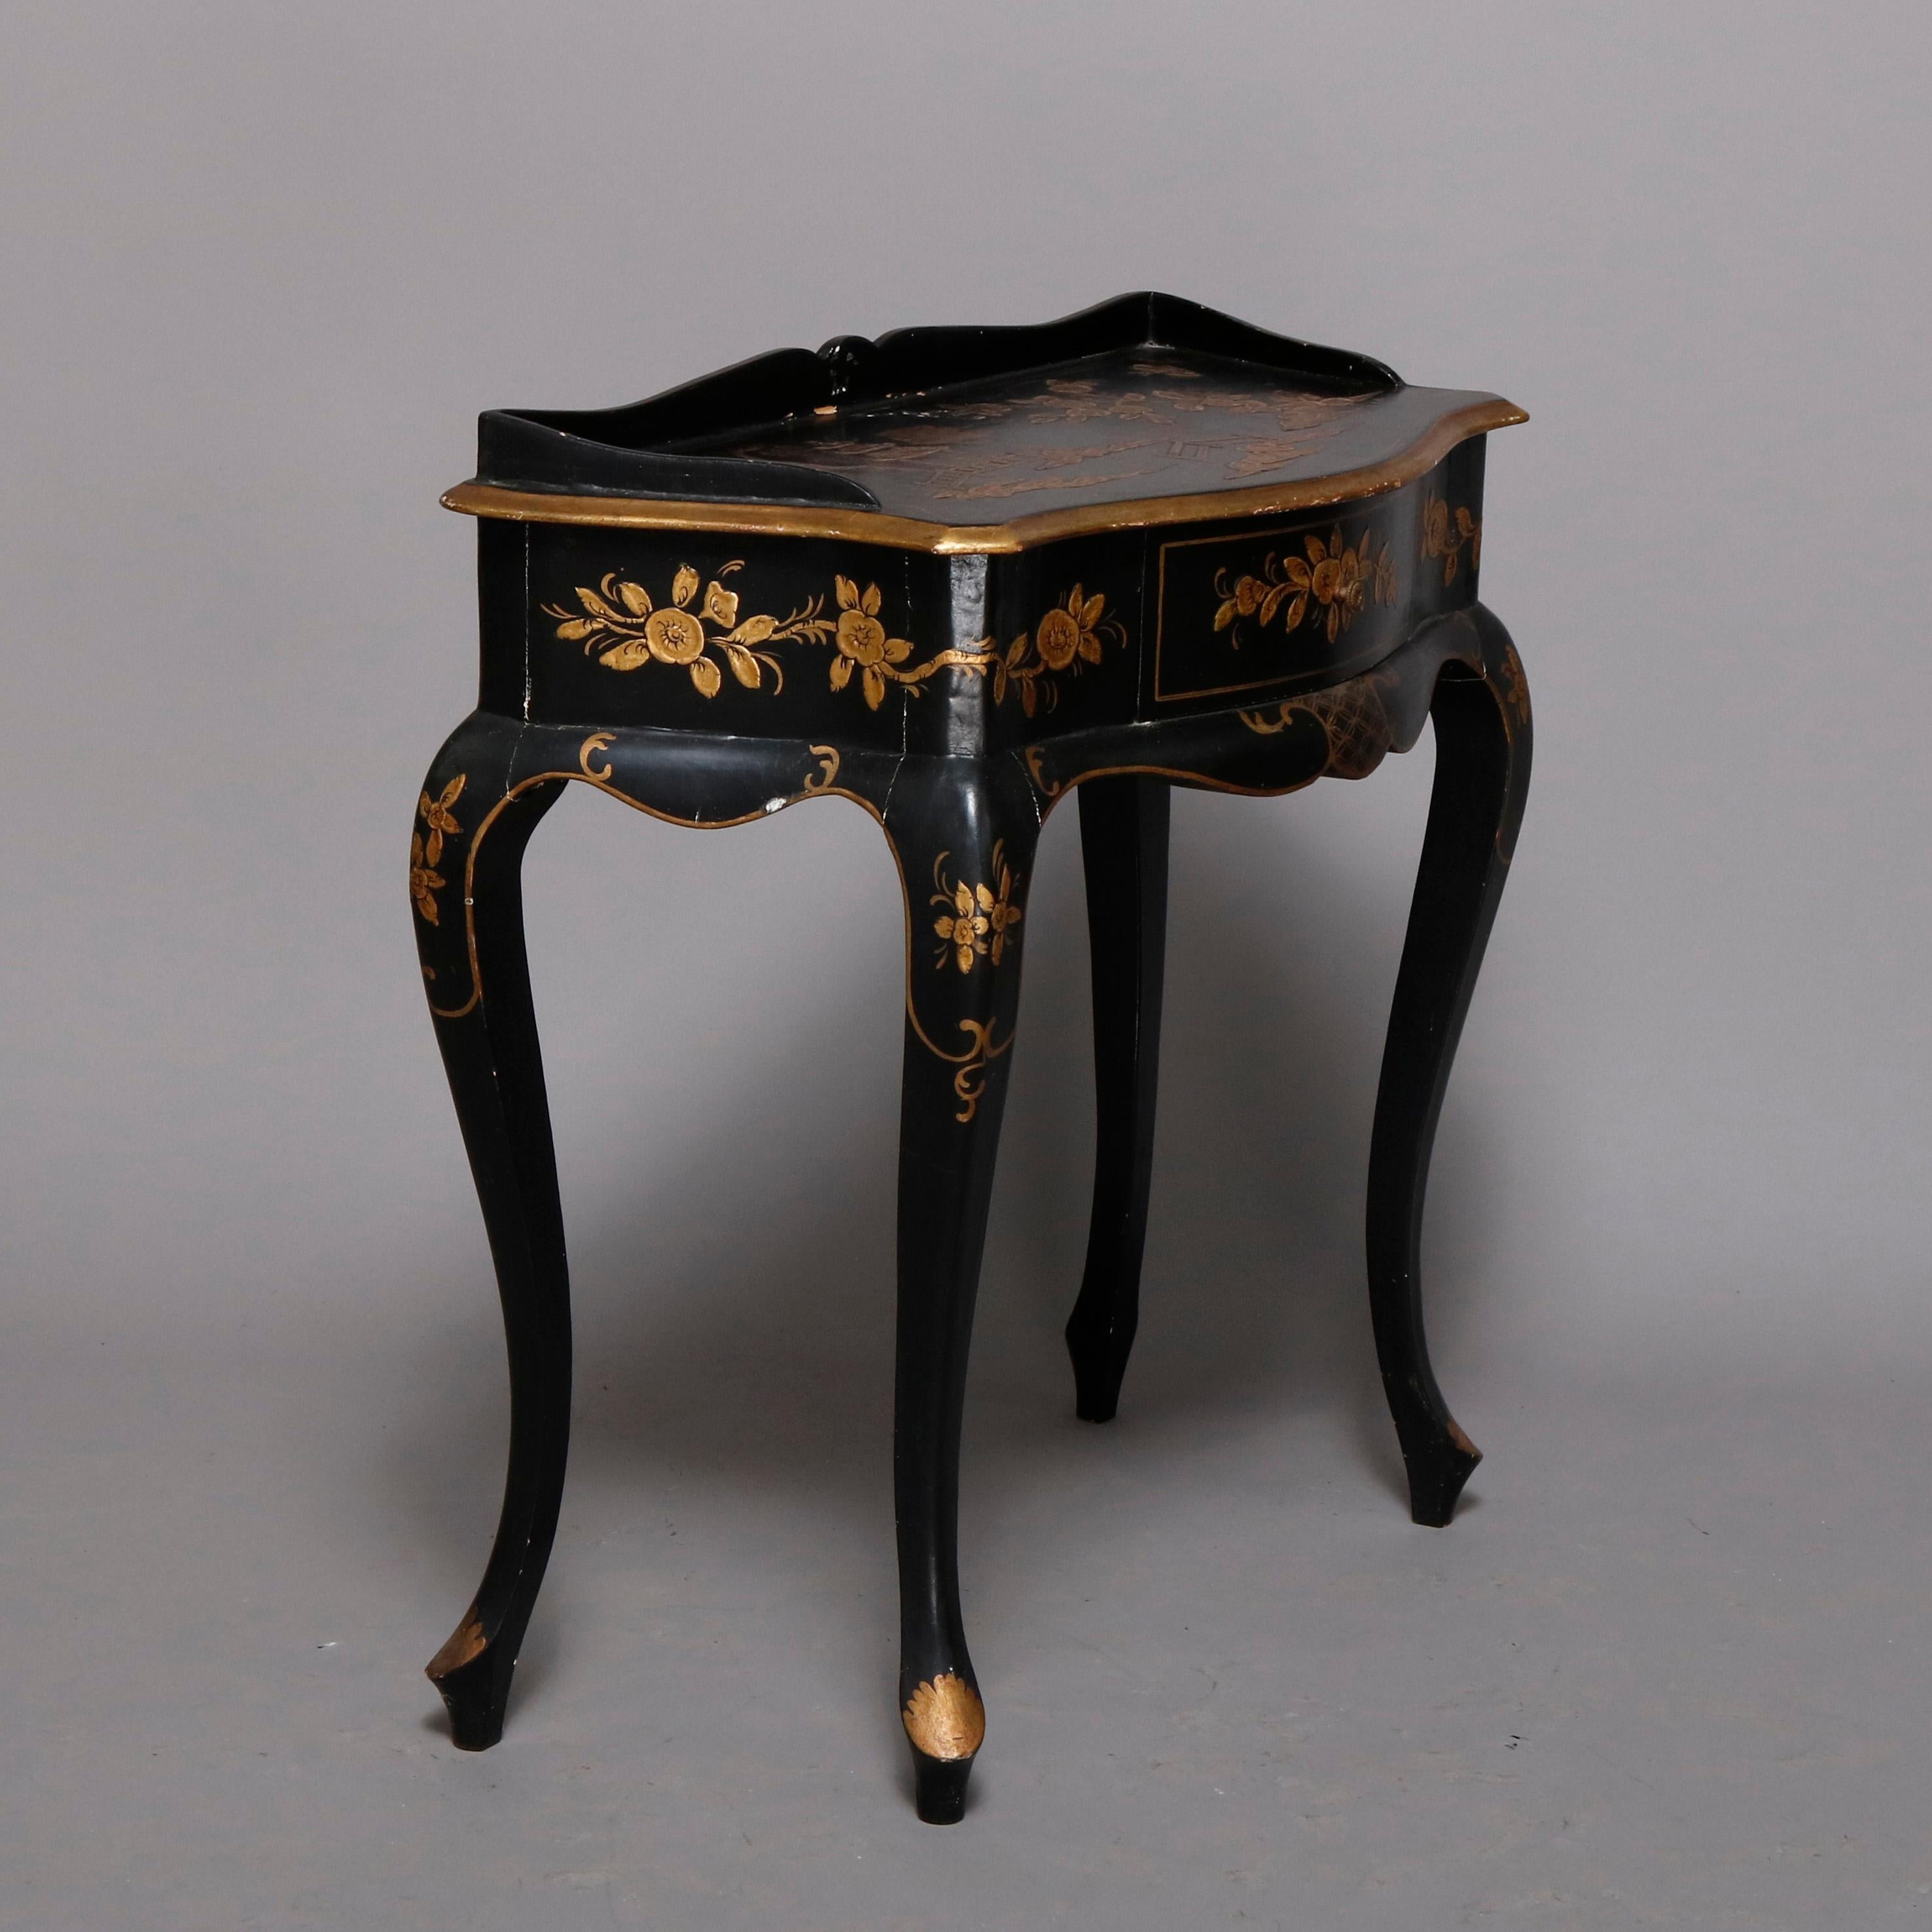 Chinoiserie oriental console hall table offers serpentine form with single drawer and backsplash, ebonized finish having hand painted and gilt decoration including top garden scene with pagoda and floral spray throughout, raised on cabriole legs